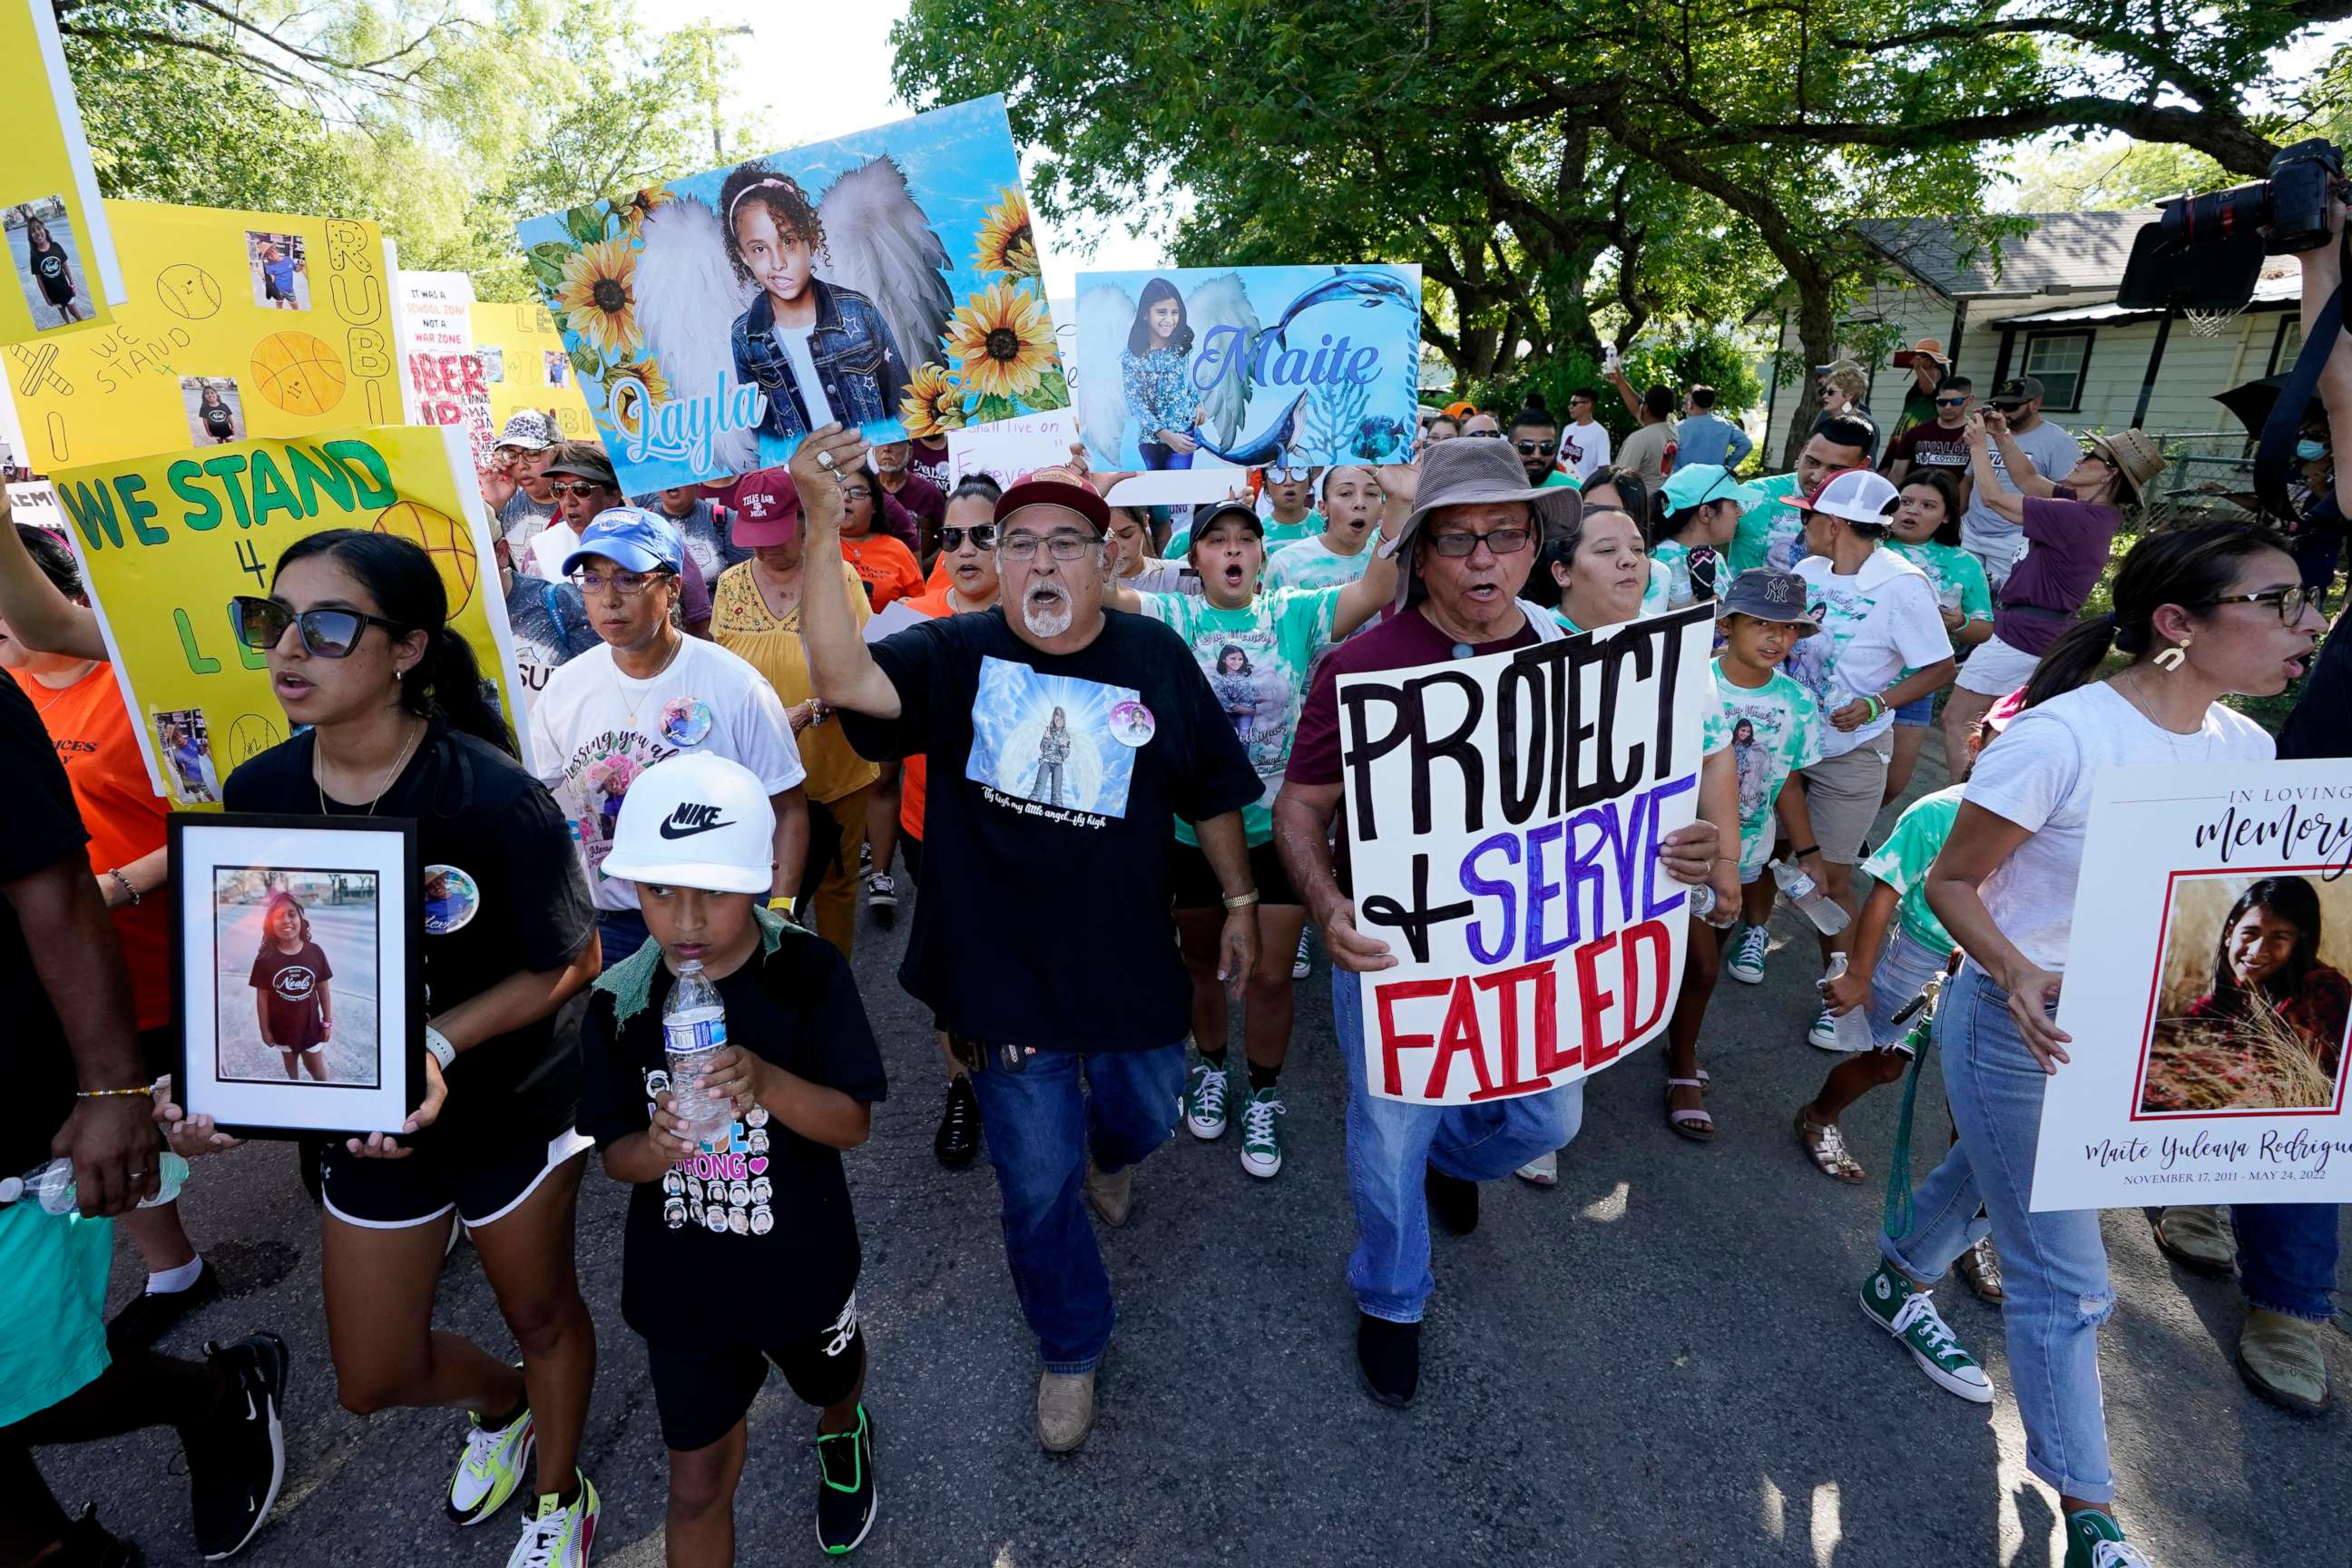 PHOTO: Family and friends of those killed and injured in the school shooting at Robb Elementary take part in a protest march and rally, July 10, 2022, in Uvalde, Texas.